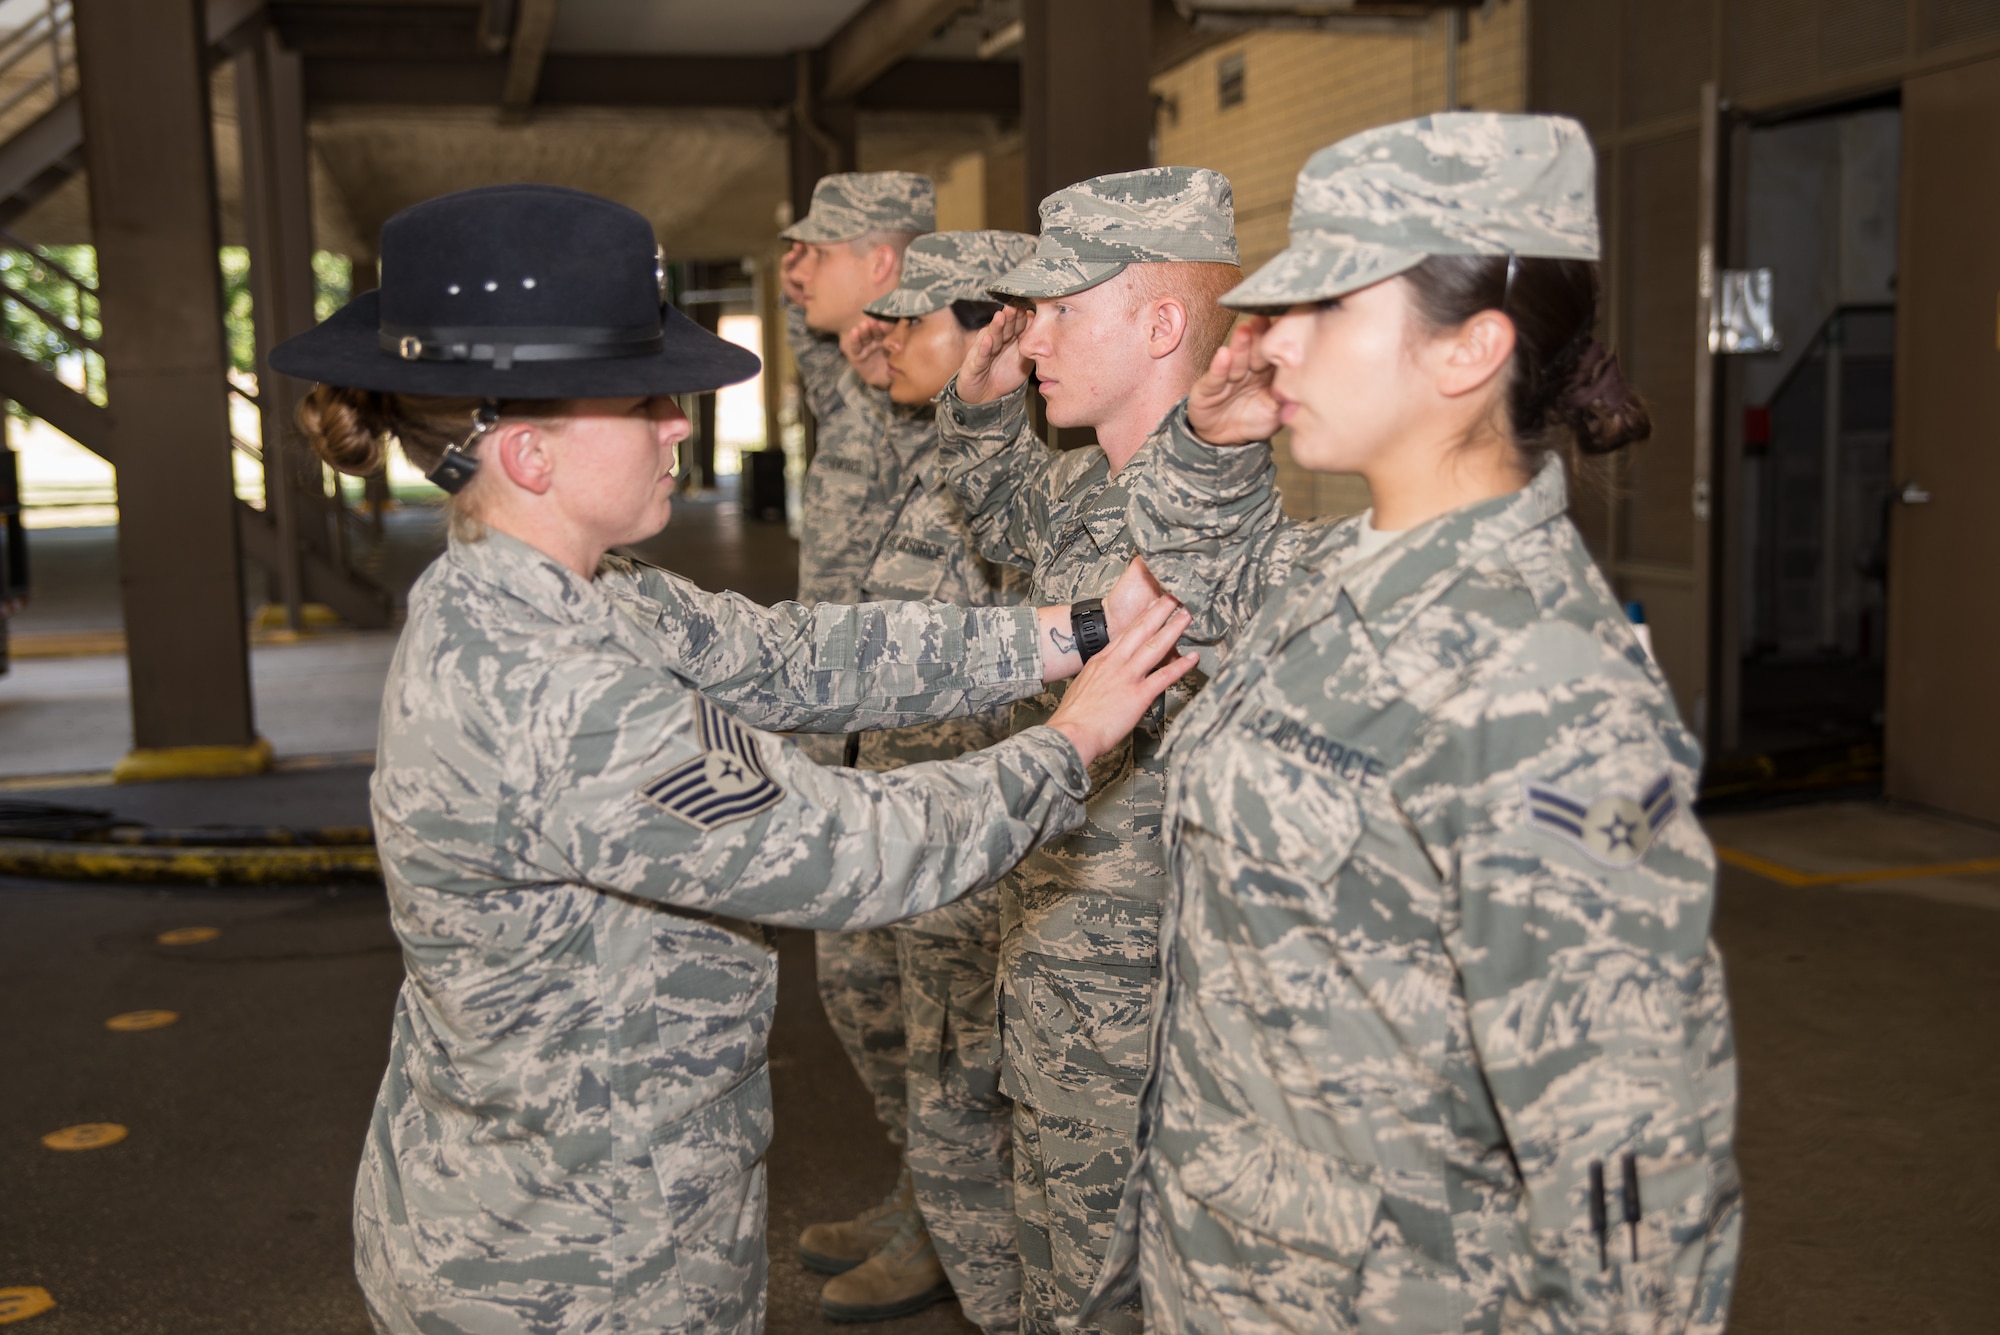 Tech. Sgt. Megan Harper, A 326th Training Squadron military training instructor facilitator, instructs new Airmen on performing a proper salute at the 326th TRS at Joint Base San Antonio-Lackland, Texas June 28, 2017. As a facilitator, Harper’s job is to facilitate classes during Airmen’s Week, a transitionary character development period between basic military training and technical school when Airmen have the opportunity to apply and internalize the Air Force creed and core values taught during BMT. 